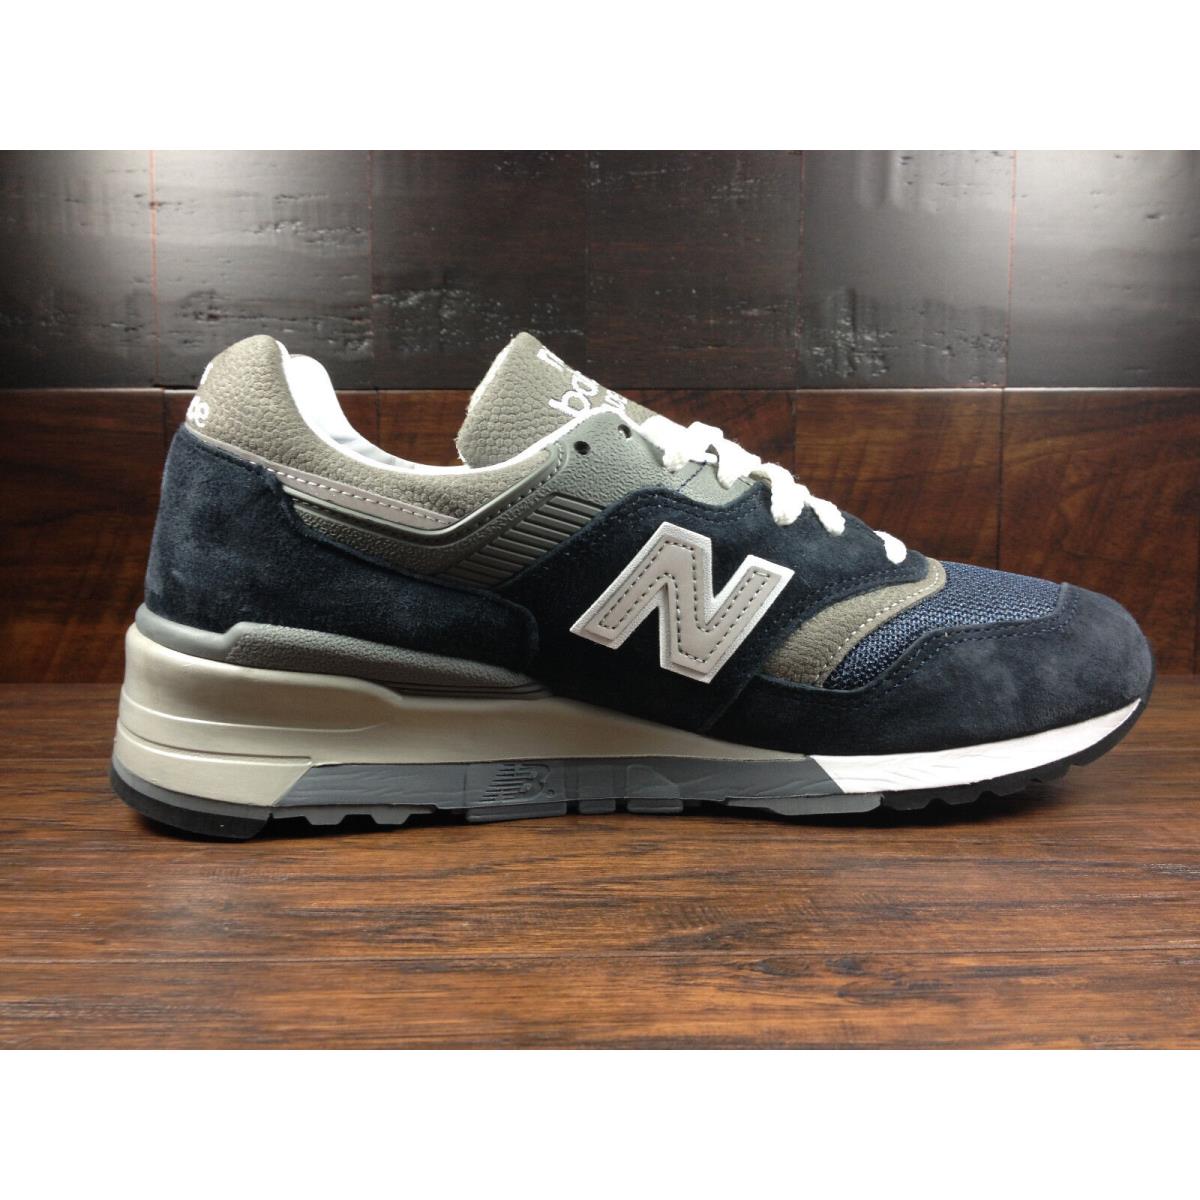 New Balance shoes  - Navy Suede / Grey / White , Navy Suede / Grey / White Main 1